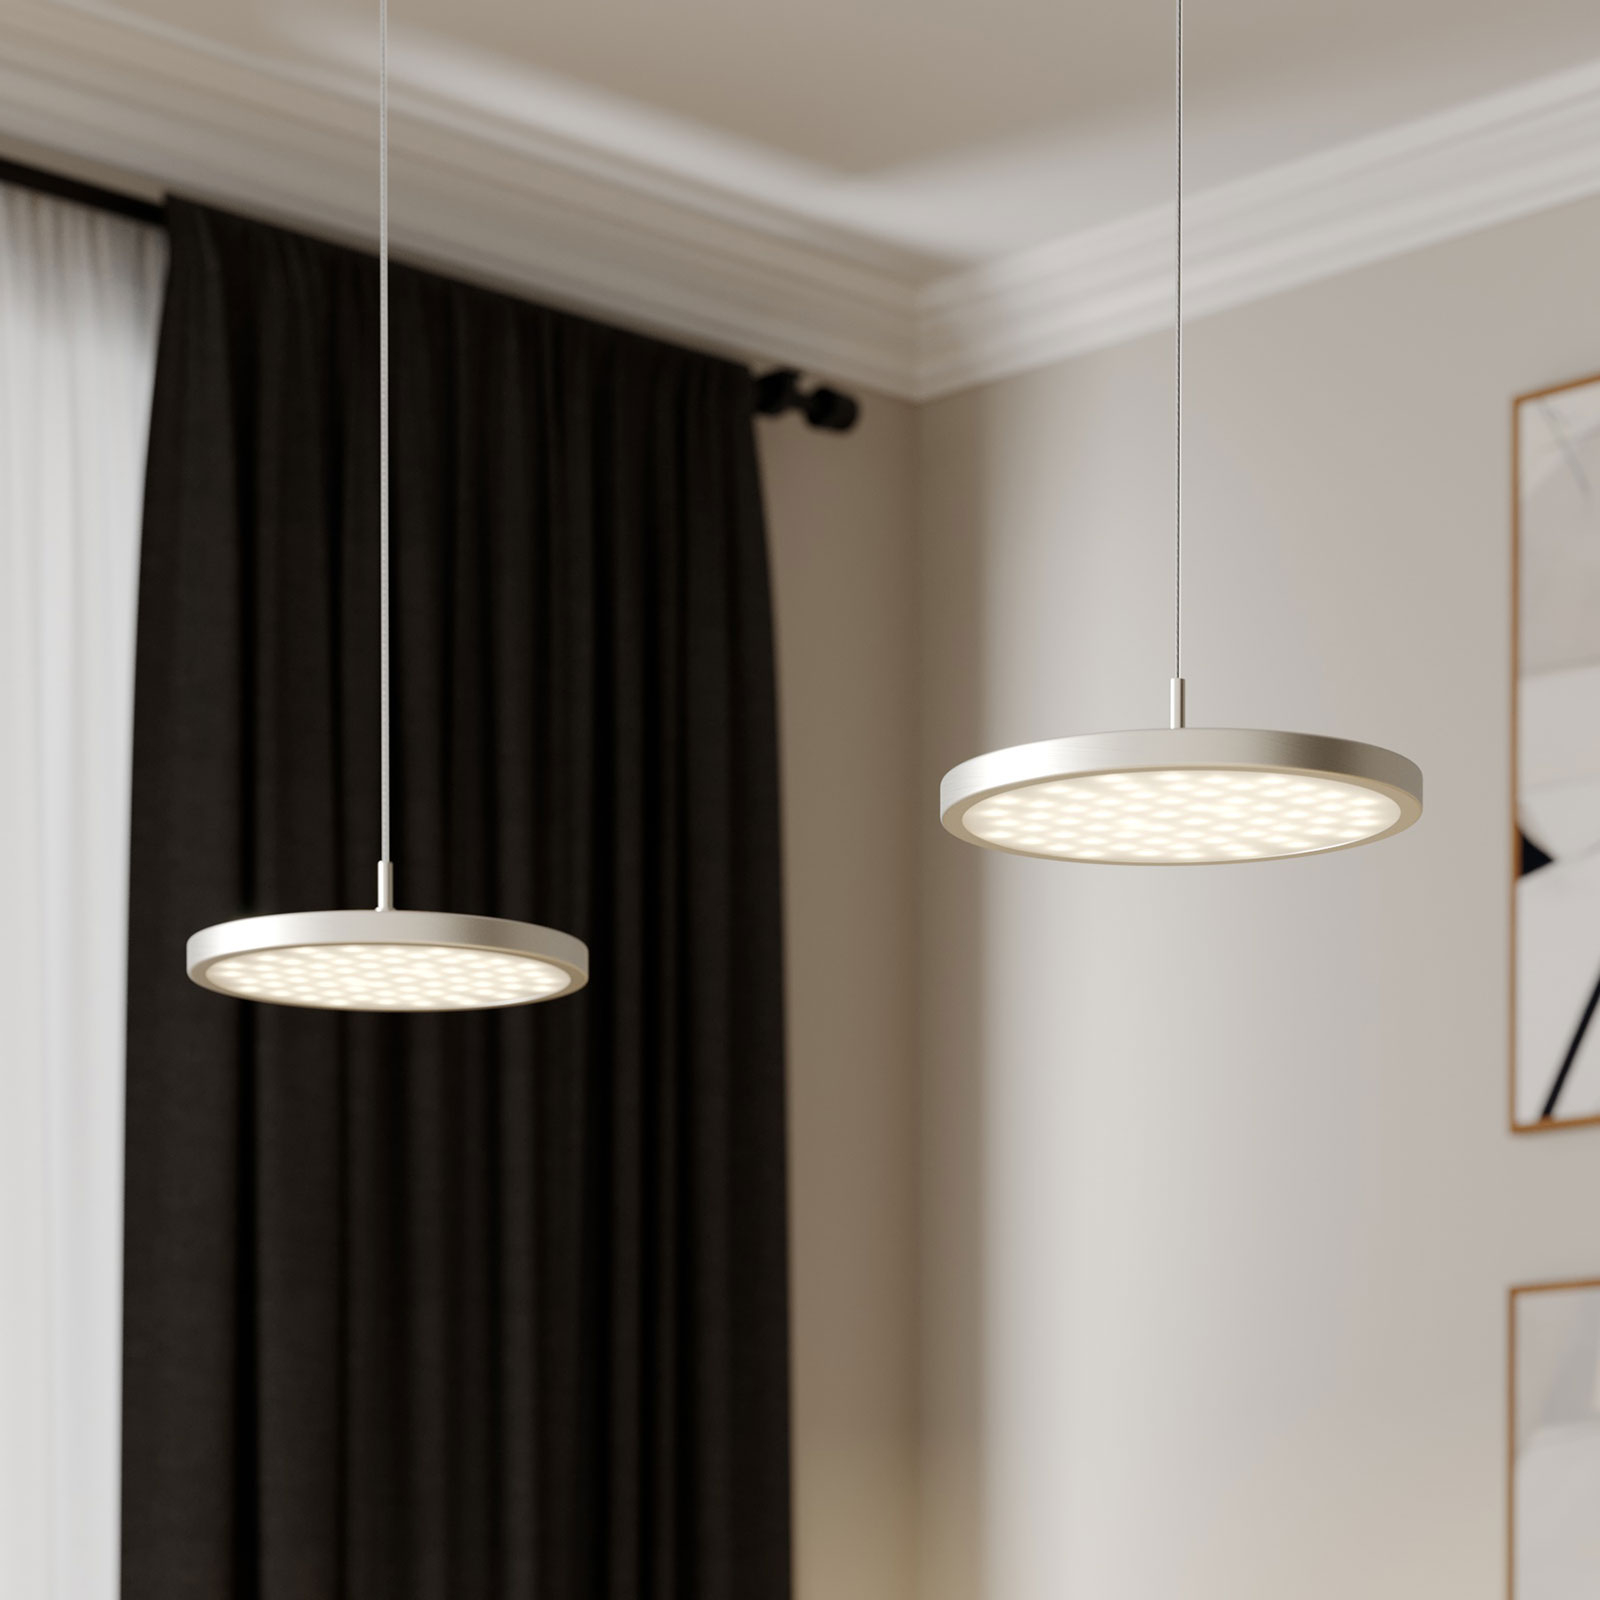 Rothfels Gion LED sospensione 2 luci nichel/rovere